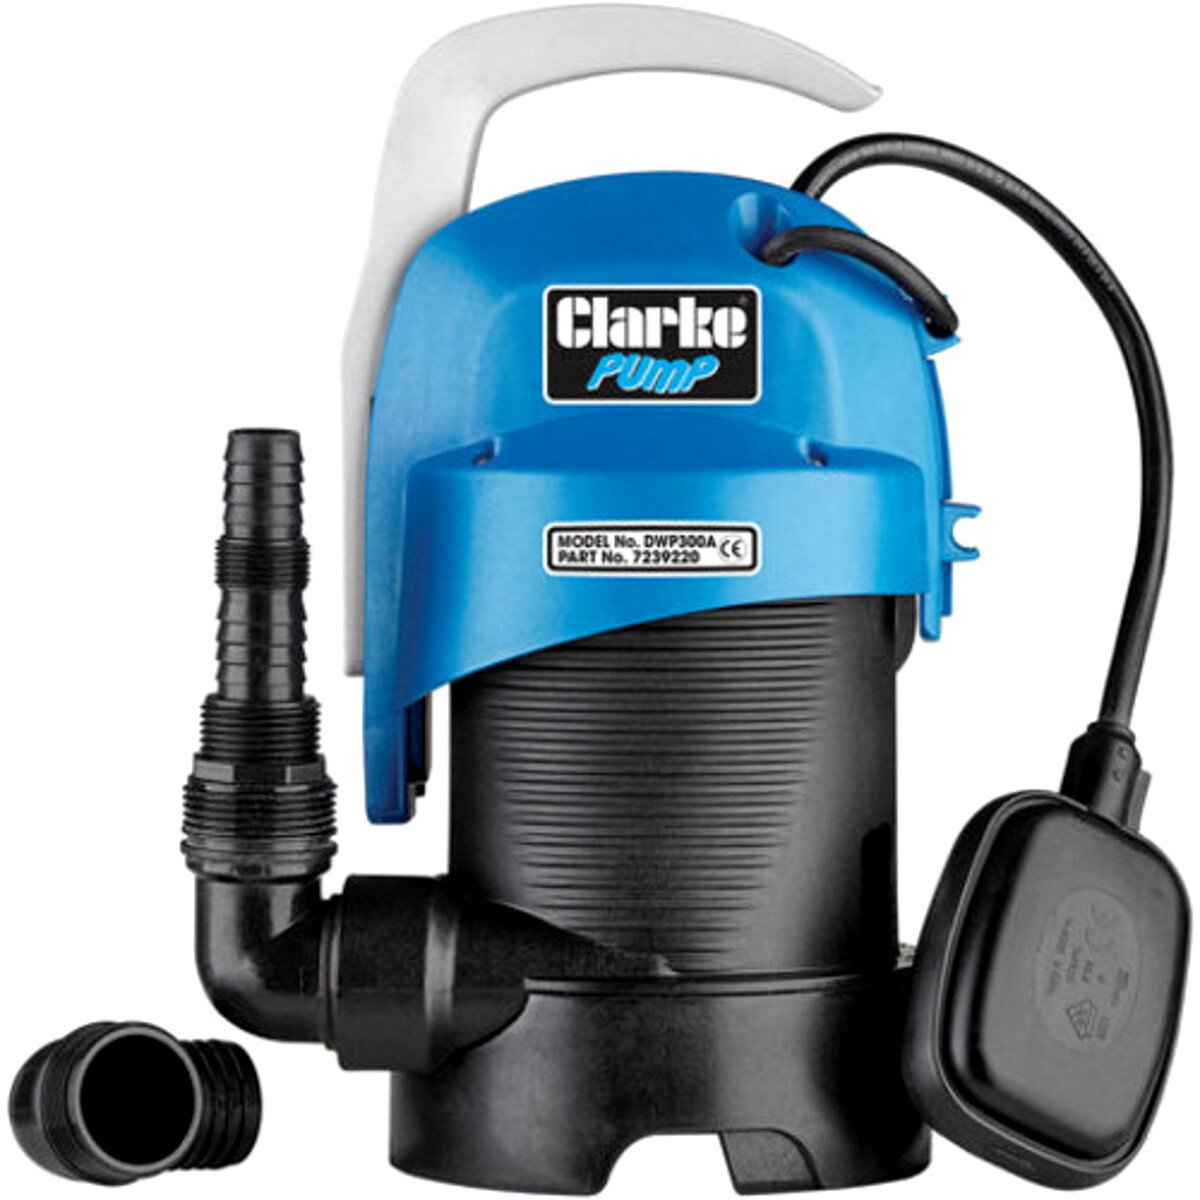 Clarke DWP300A 1¼" 330W 130Lpm 5.5m Head Clean and Dirty Water Submersible 230V 7239220